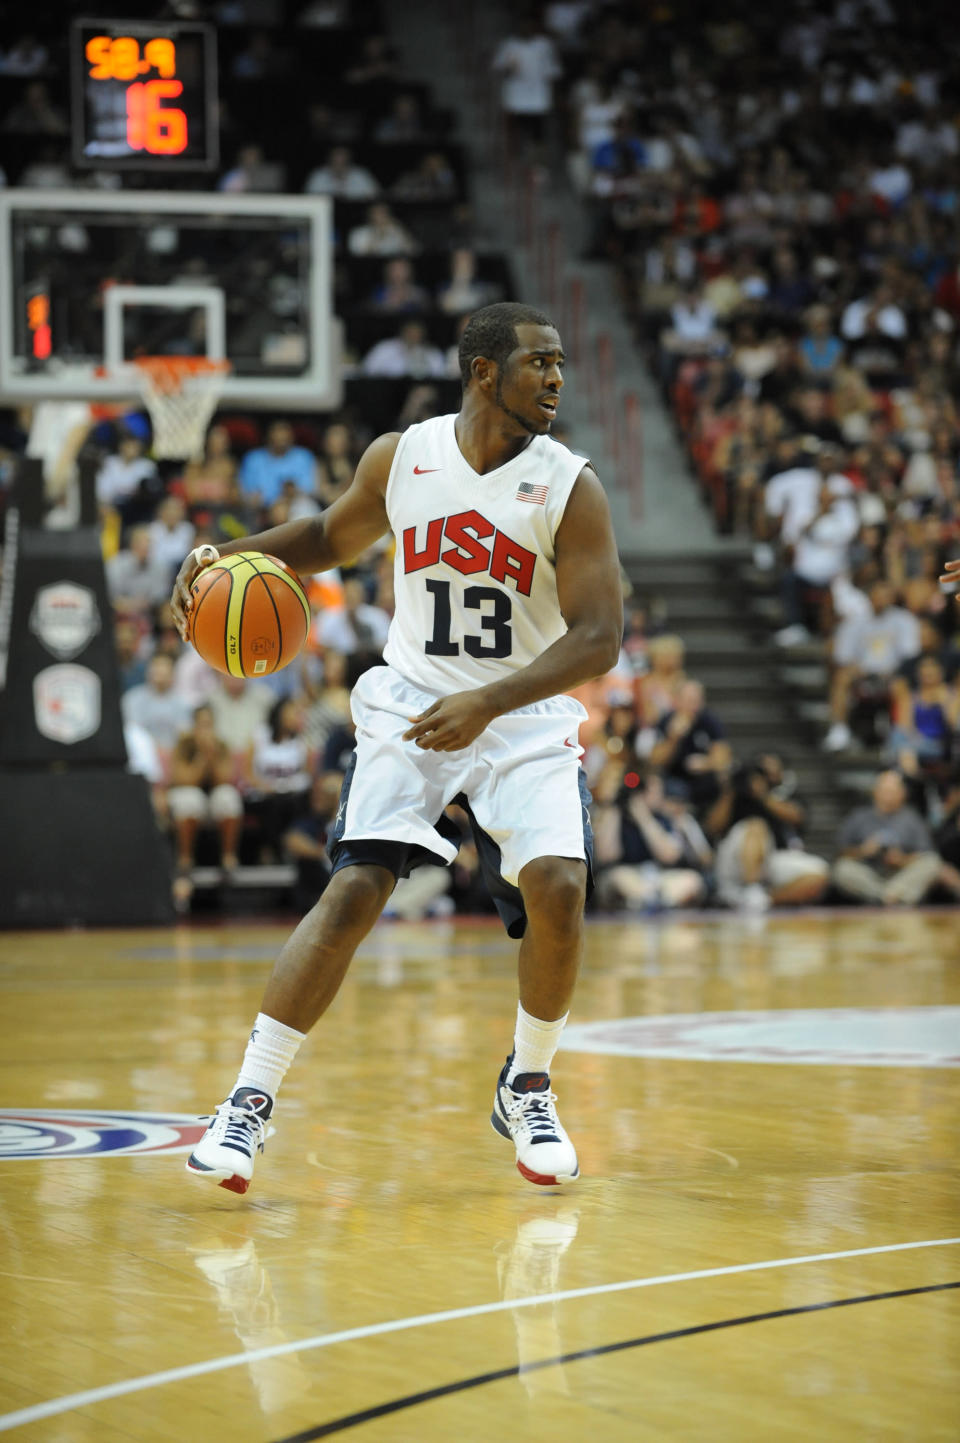 Chris Paul #13 of the US Men's Senior National Team looks to pass against the Dominican Republic during an exhibition game at the Thomas and Mack Center on July 12, 2012 in Las Vegas, Nevada. (Noah Graham/NBAE via Getty Images)